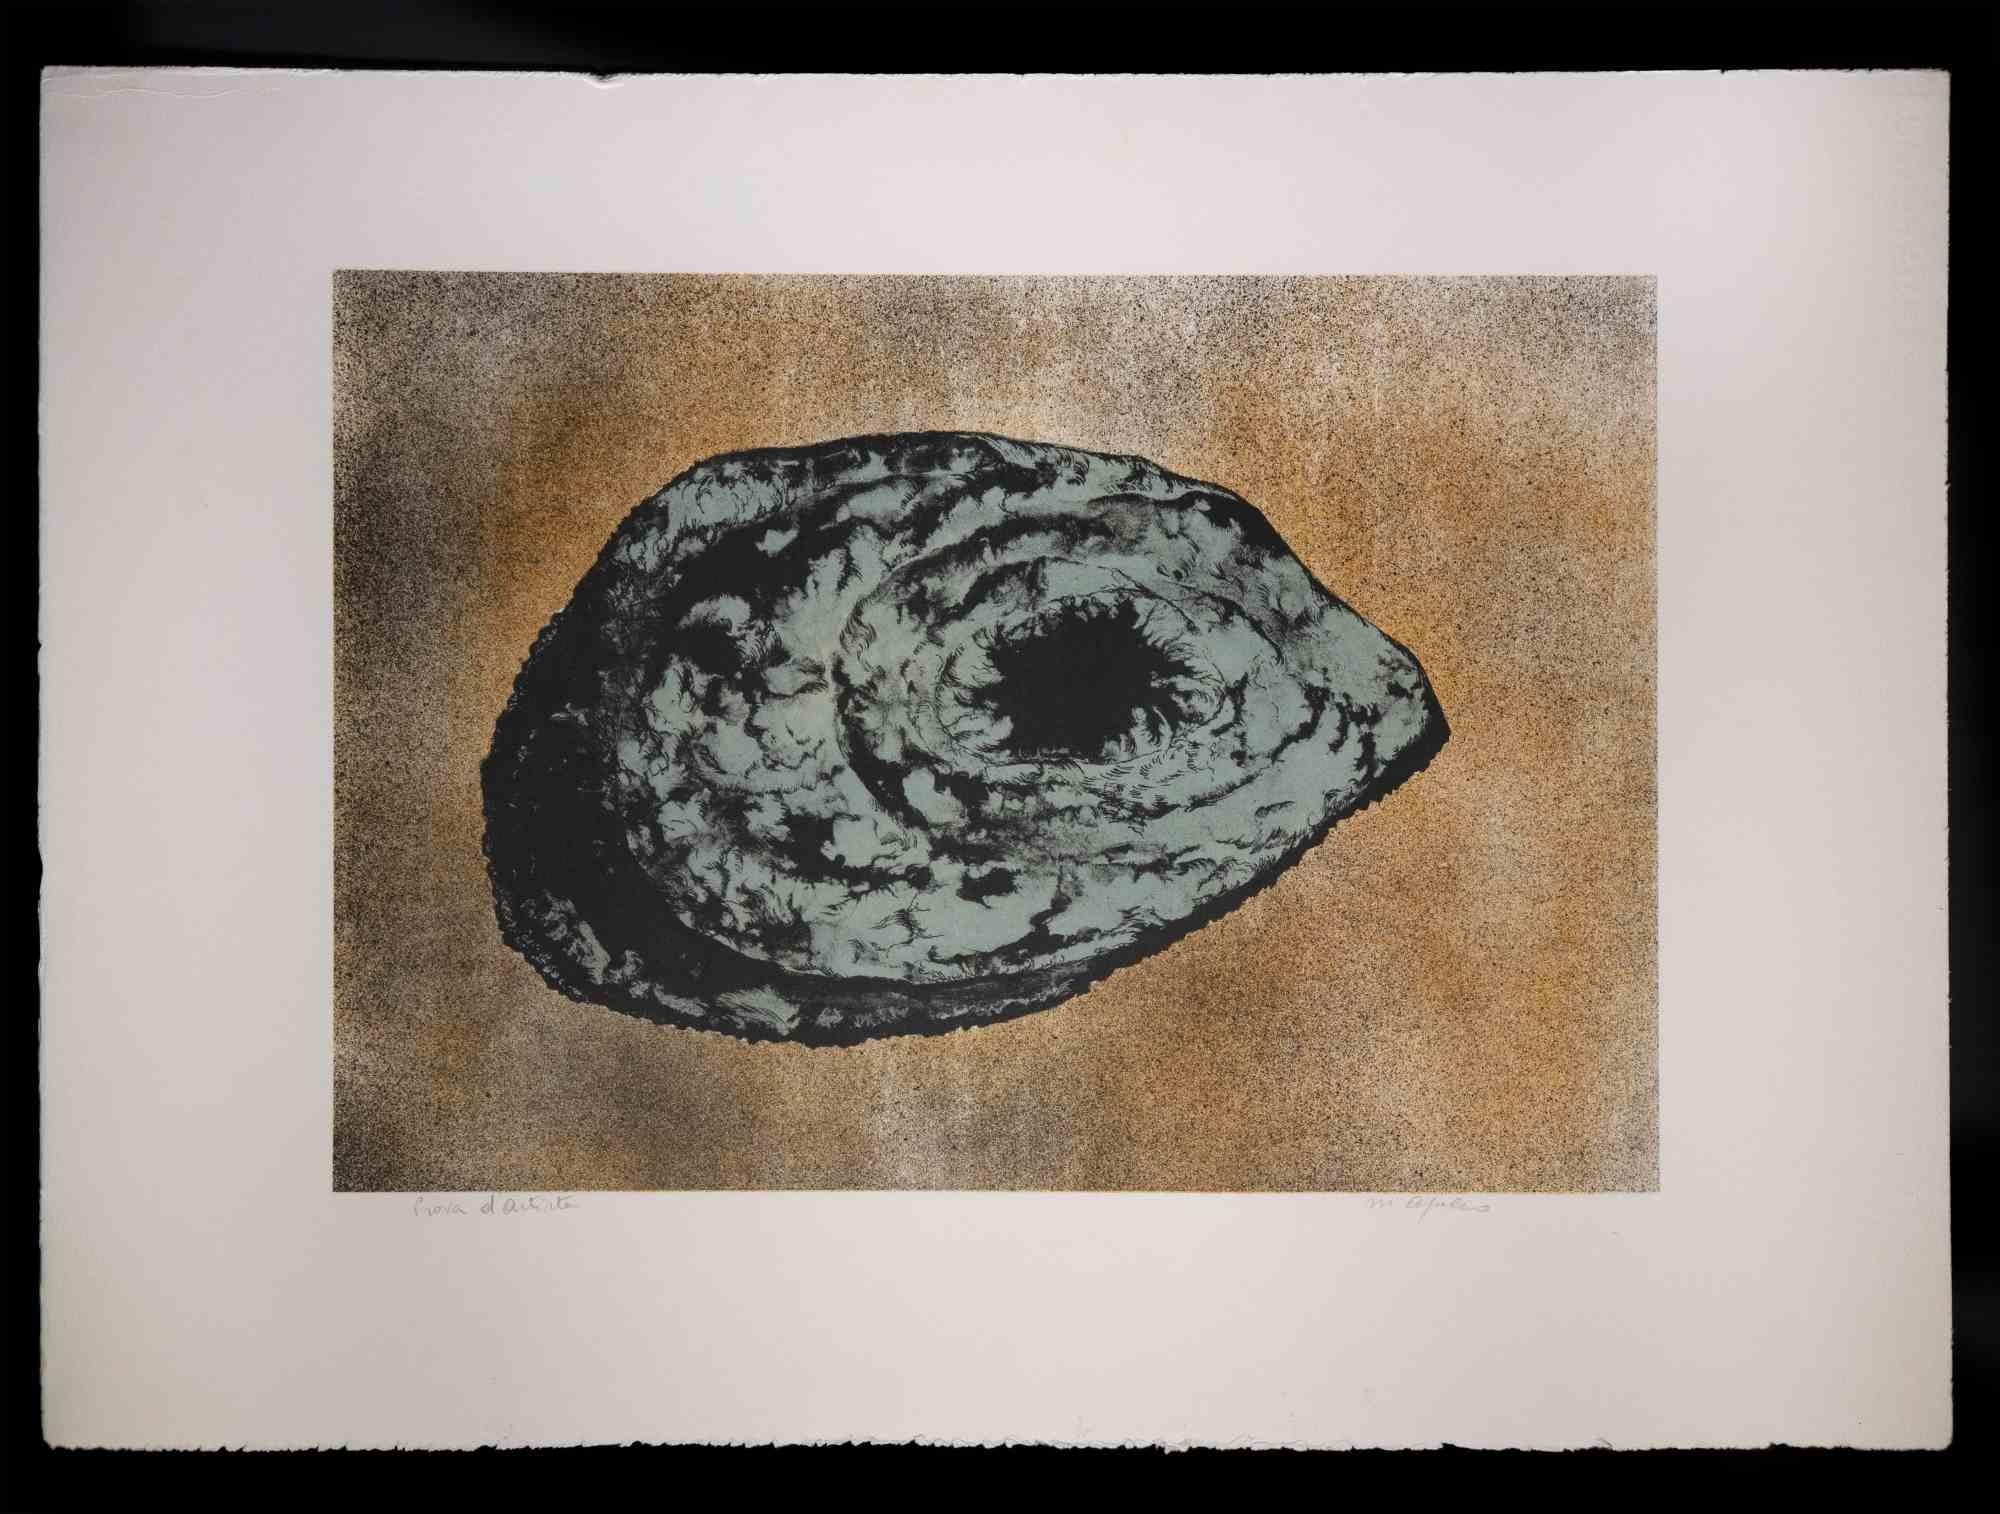 Asteroid is an original lithograph, realized by Vito Apuleo in the 1970s.

Hand-signed on the bottom right. Artist's proof as hand written by the artist on the lower left.